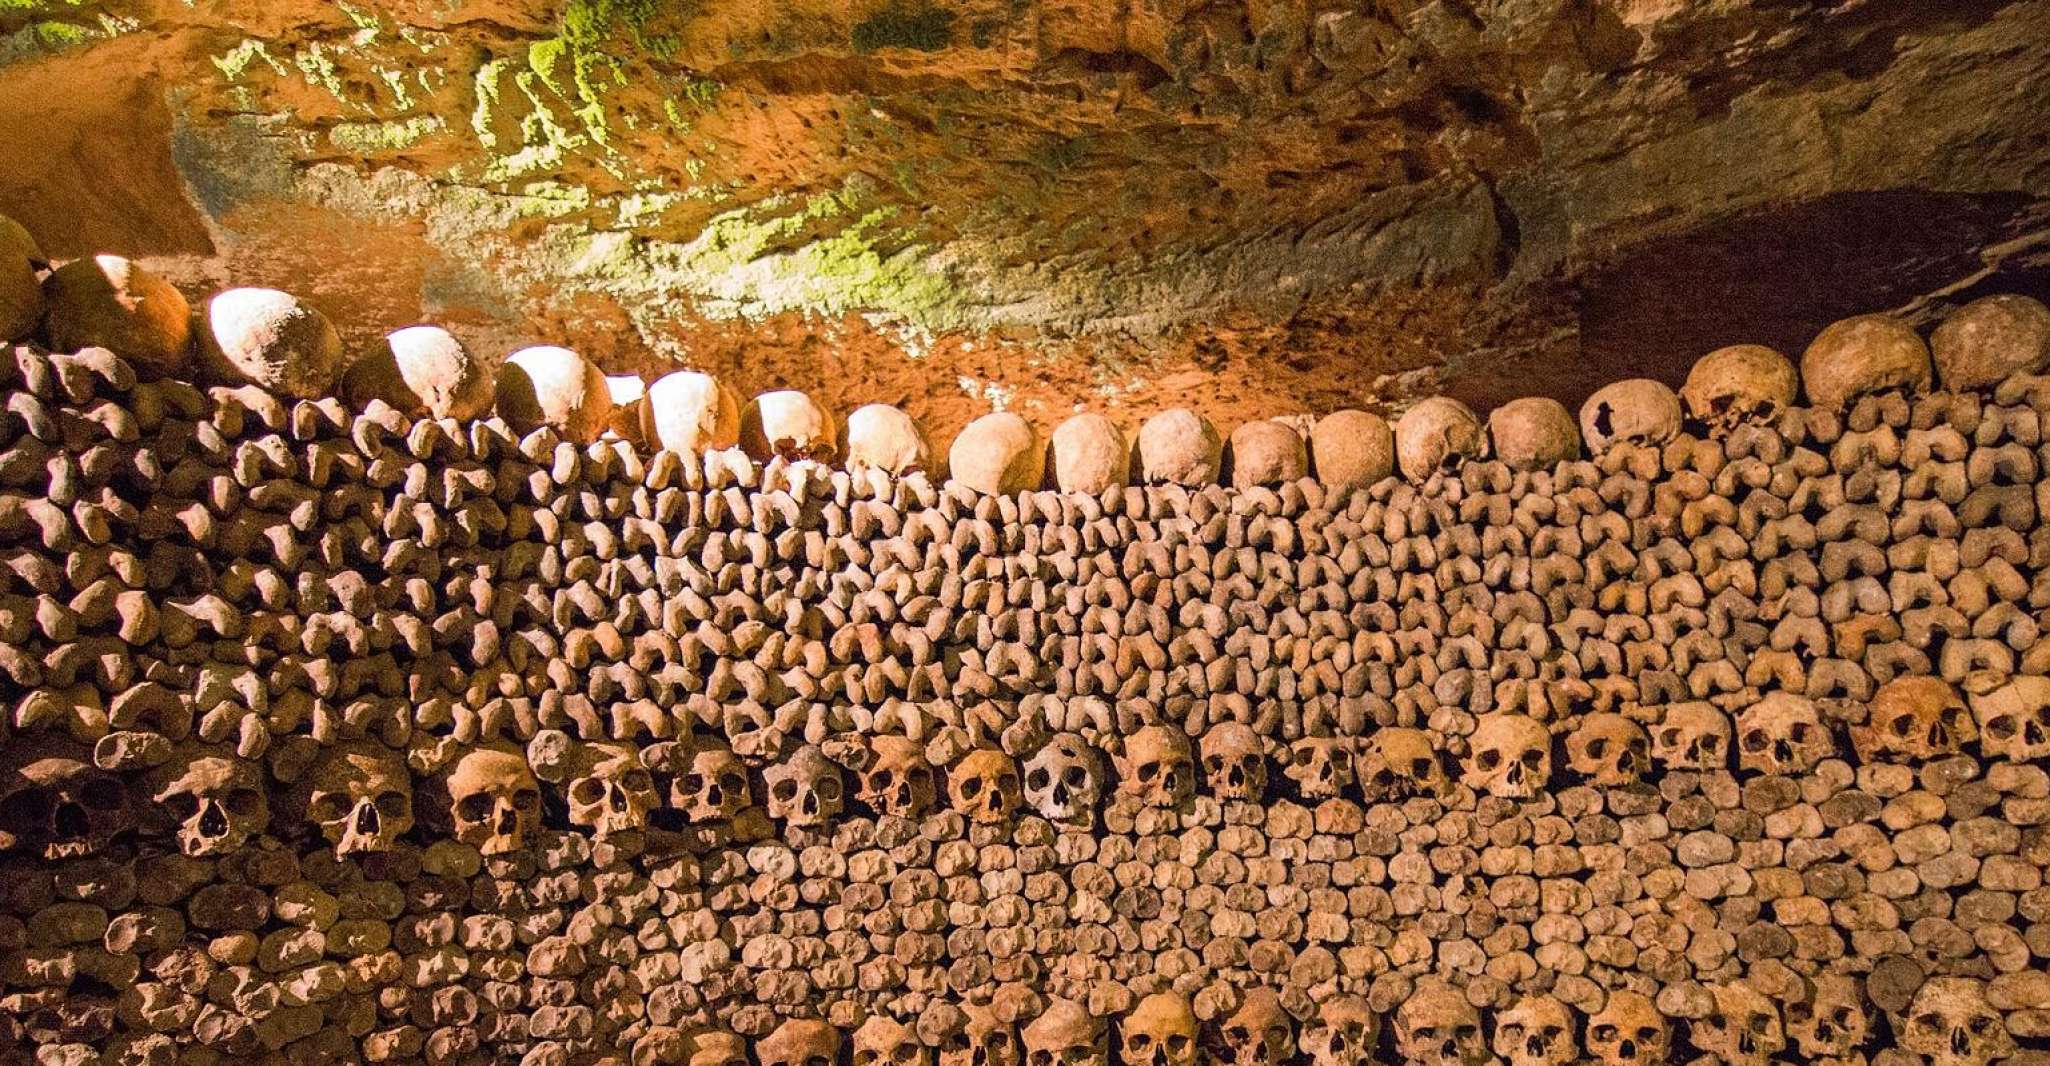 Paris, Catacombs Entry & Seine River Cruise with Audio Guide - Housity